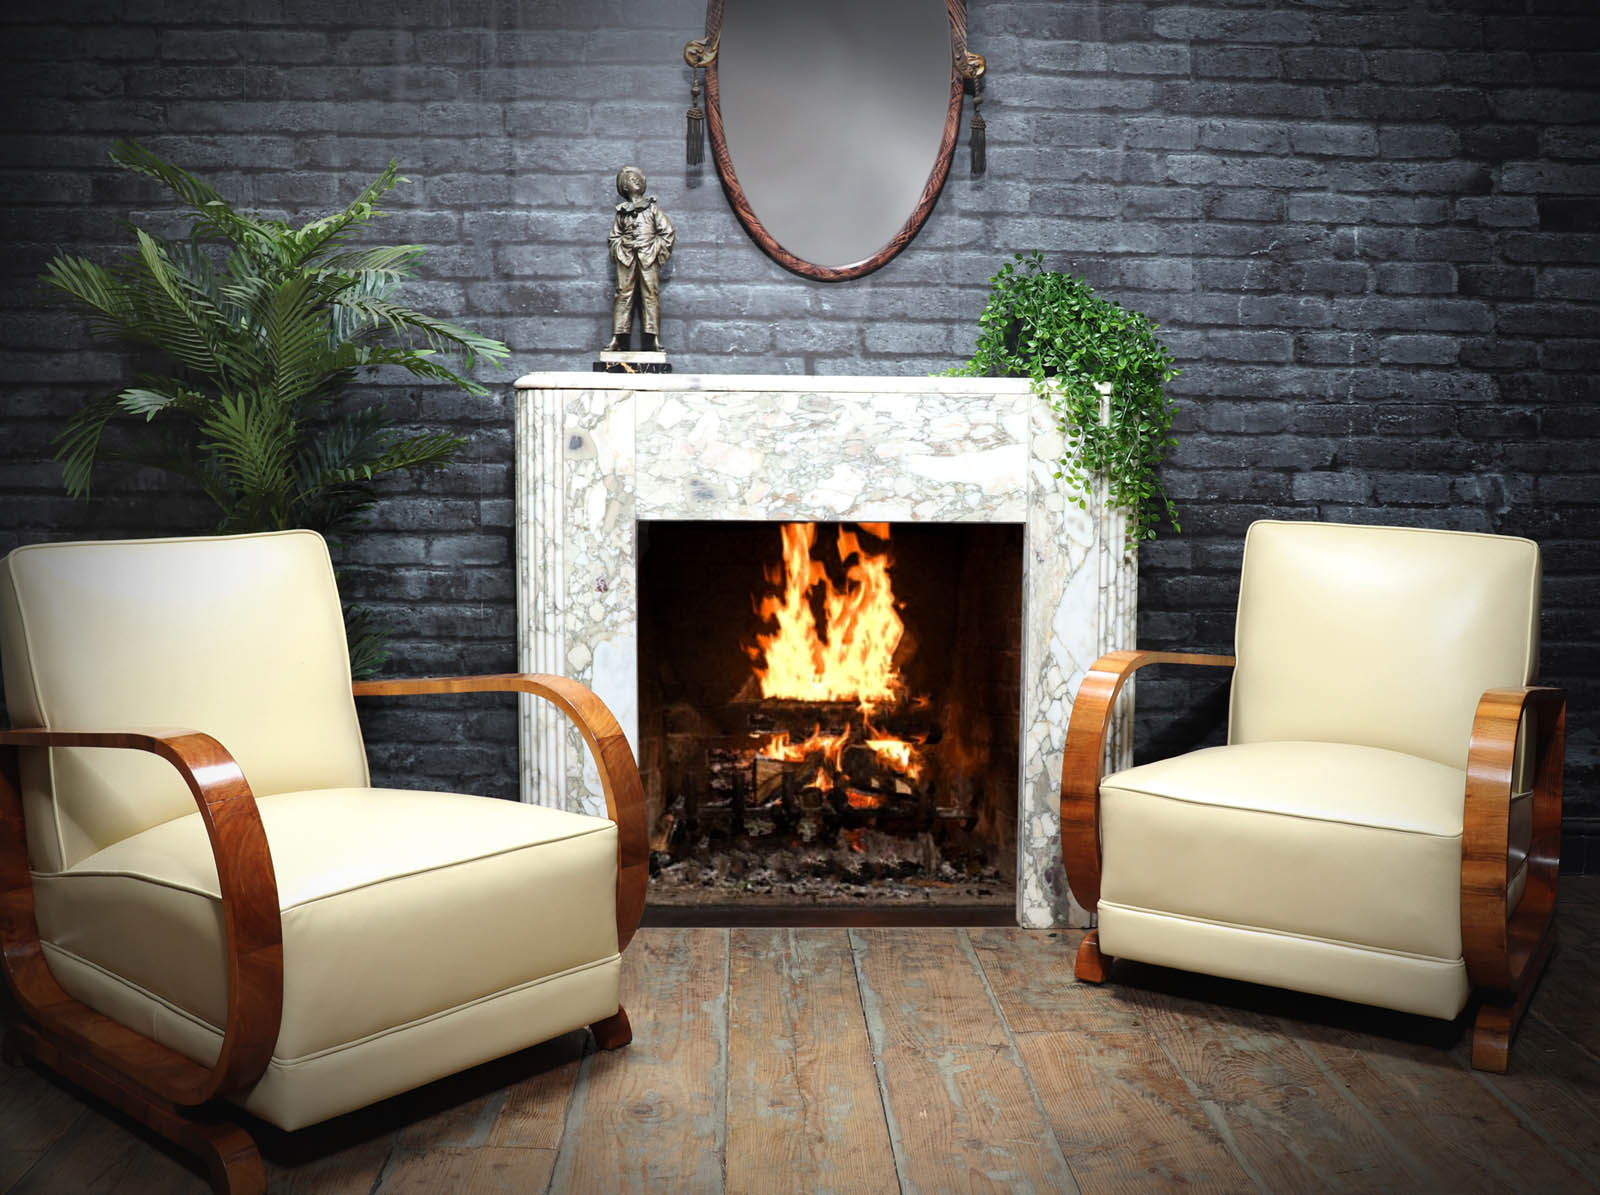 Art Deco Furniture armchairs and fireplace